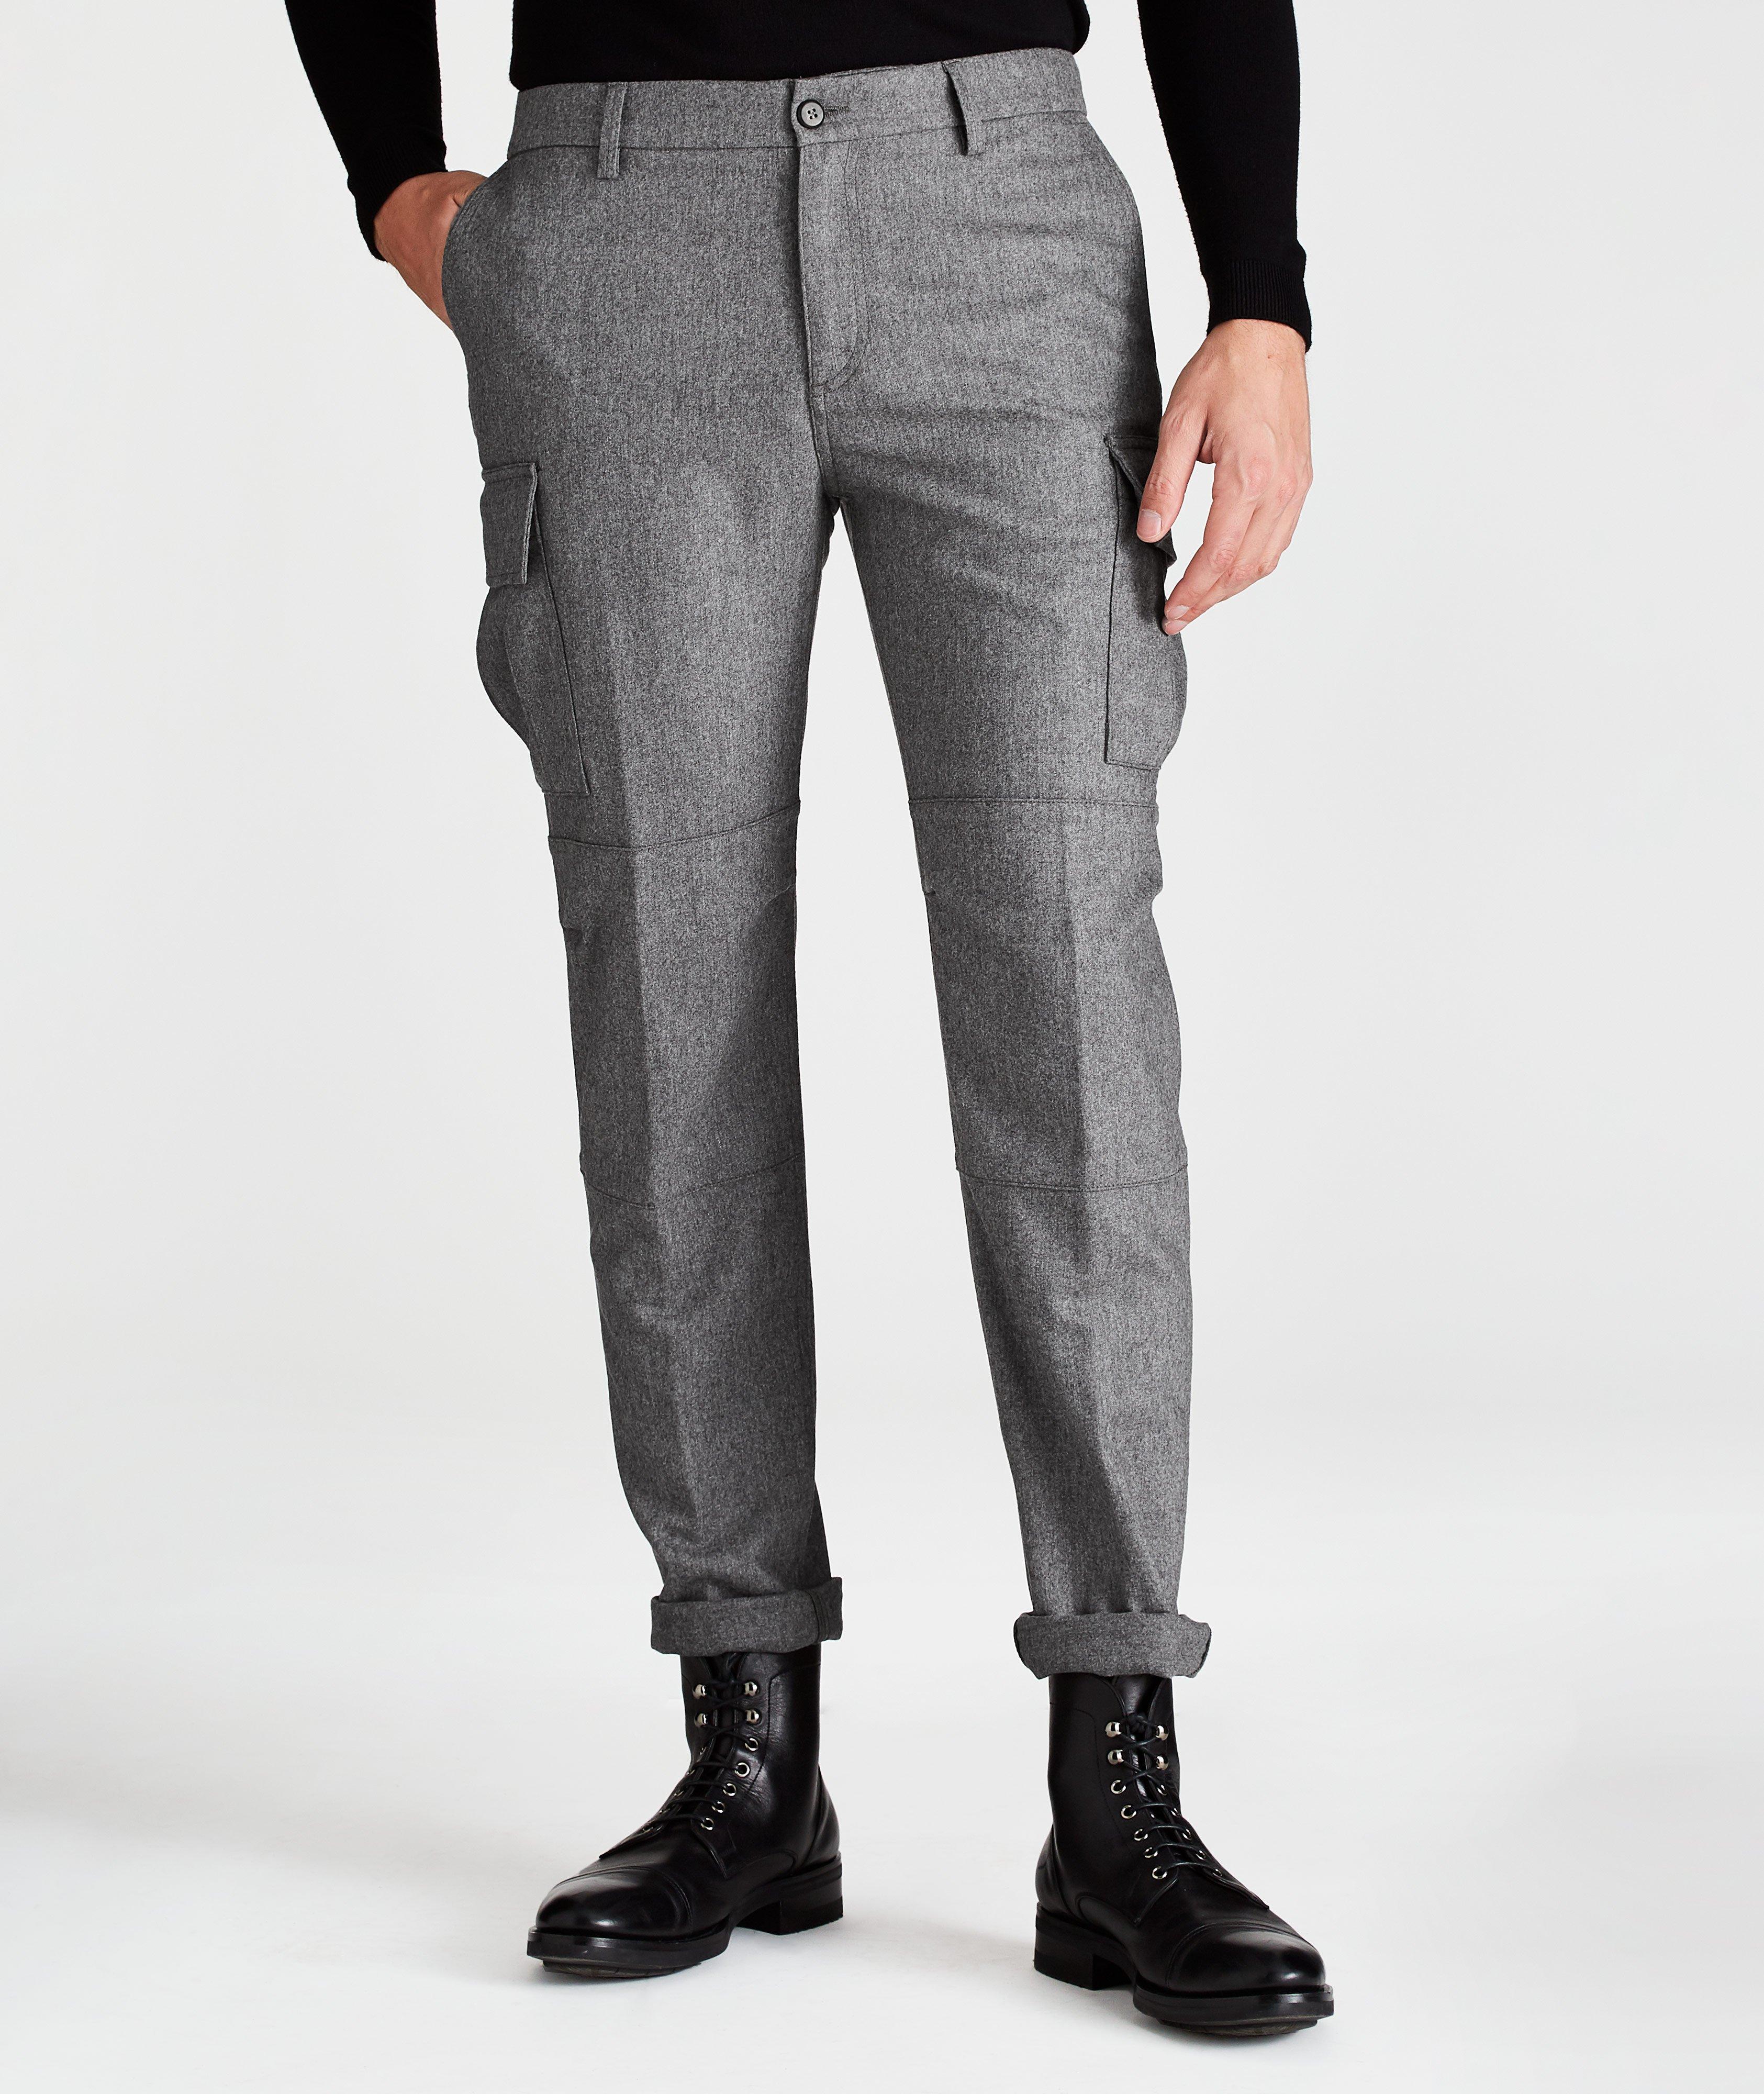 Wool-Cashmere Stretch Cargo Pants image 0